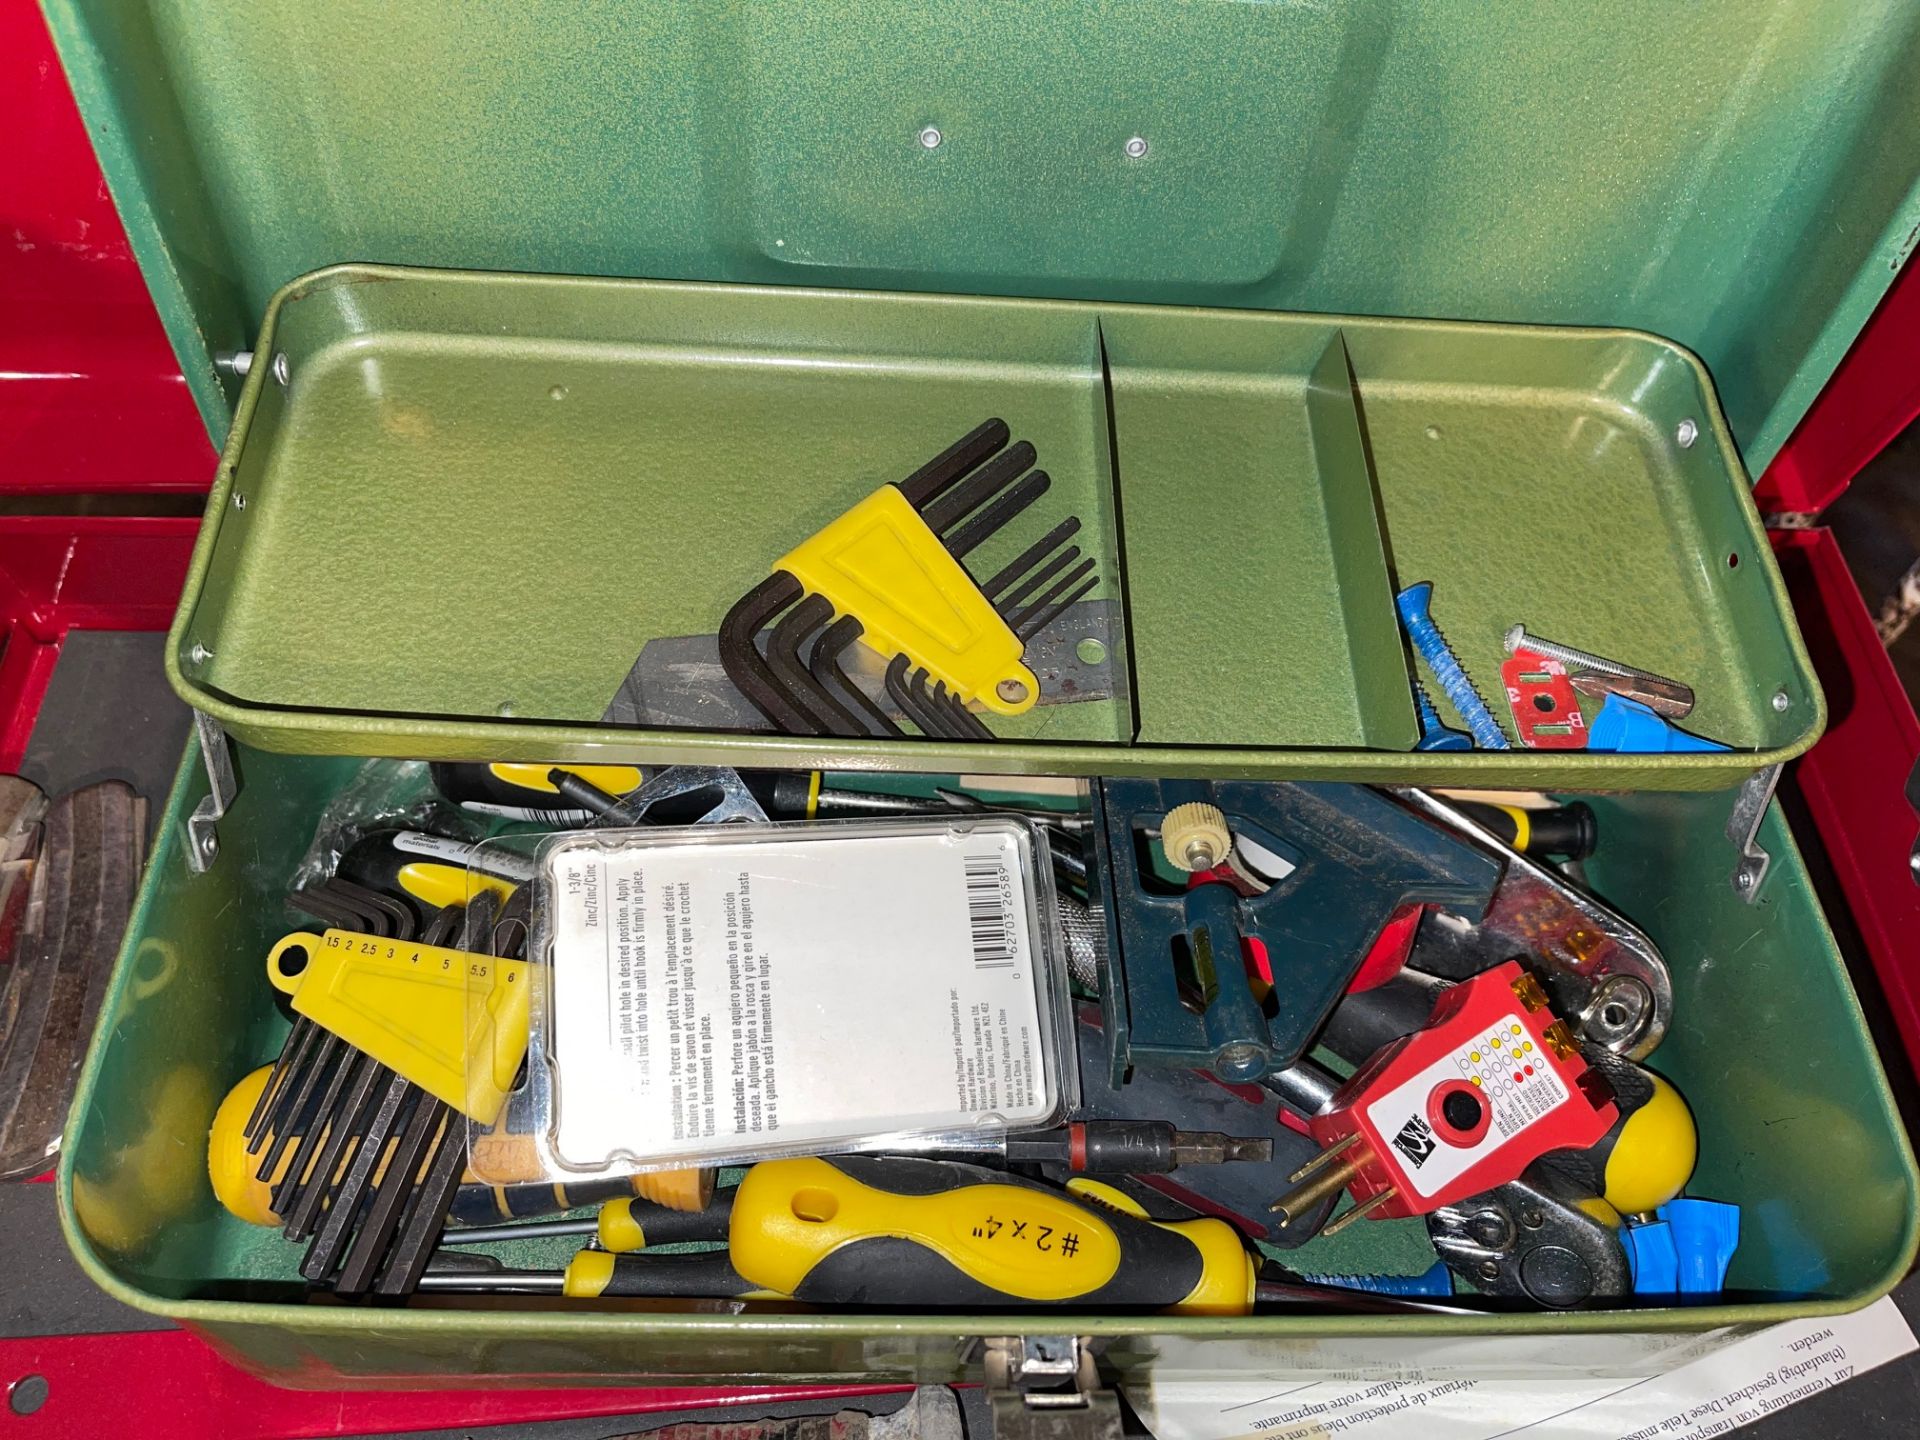 TOOLBOX IN CHEST WITH CONTENTS, SCREWDRIVERS, SALT, DRILL BITS, NUT DRIVERS, DIGITAL VENEER CALIPER, - Image 10 of 10